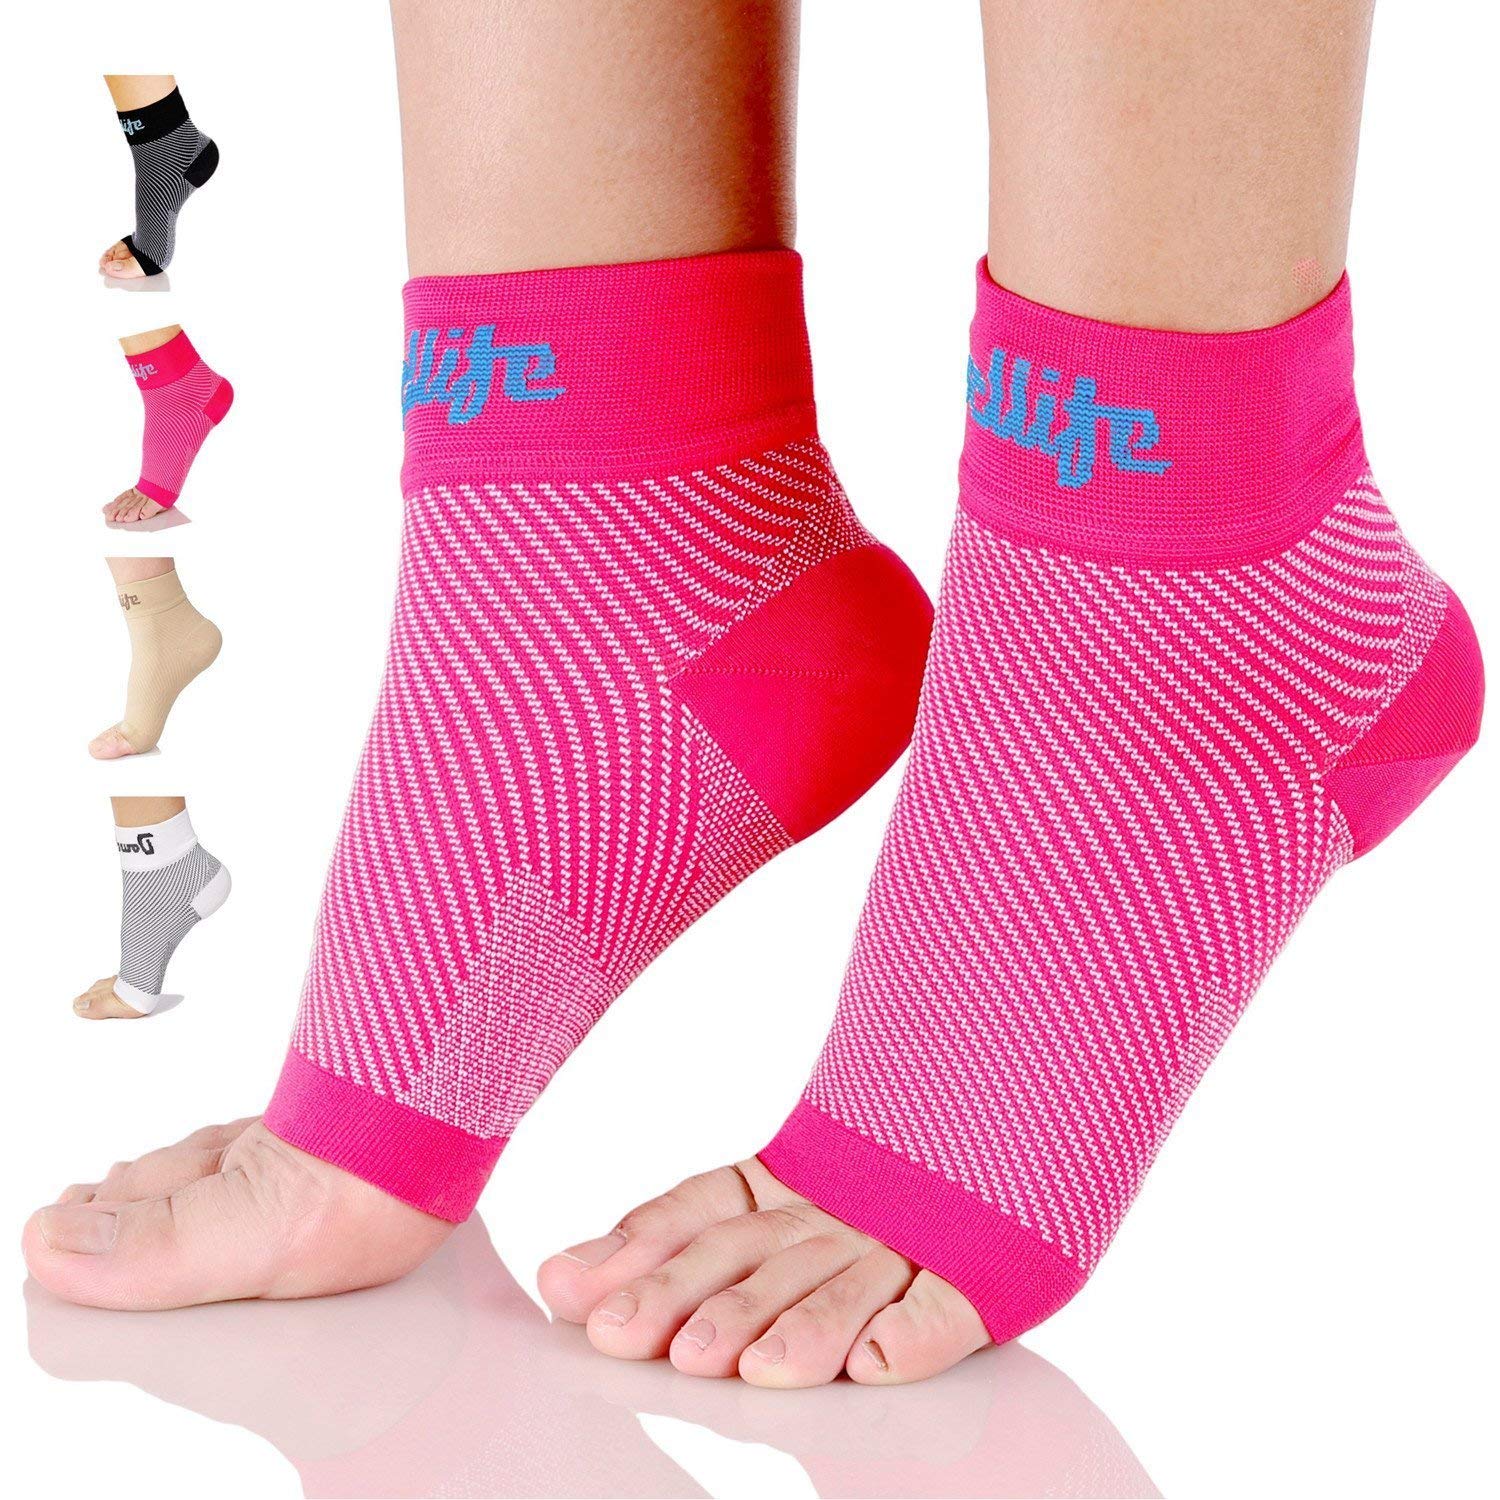 Best Ankle Braces For Running Reviewed & Rated for Quality - TheGearHunt